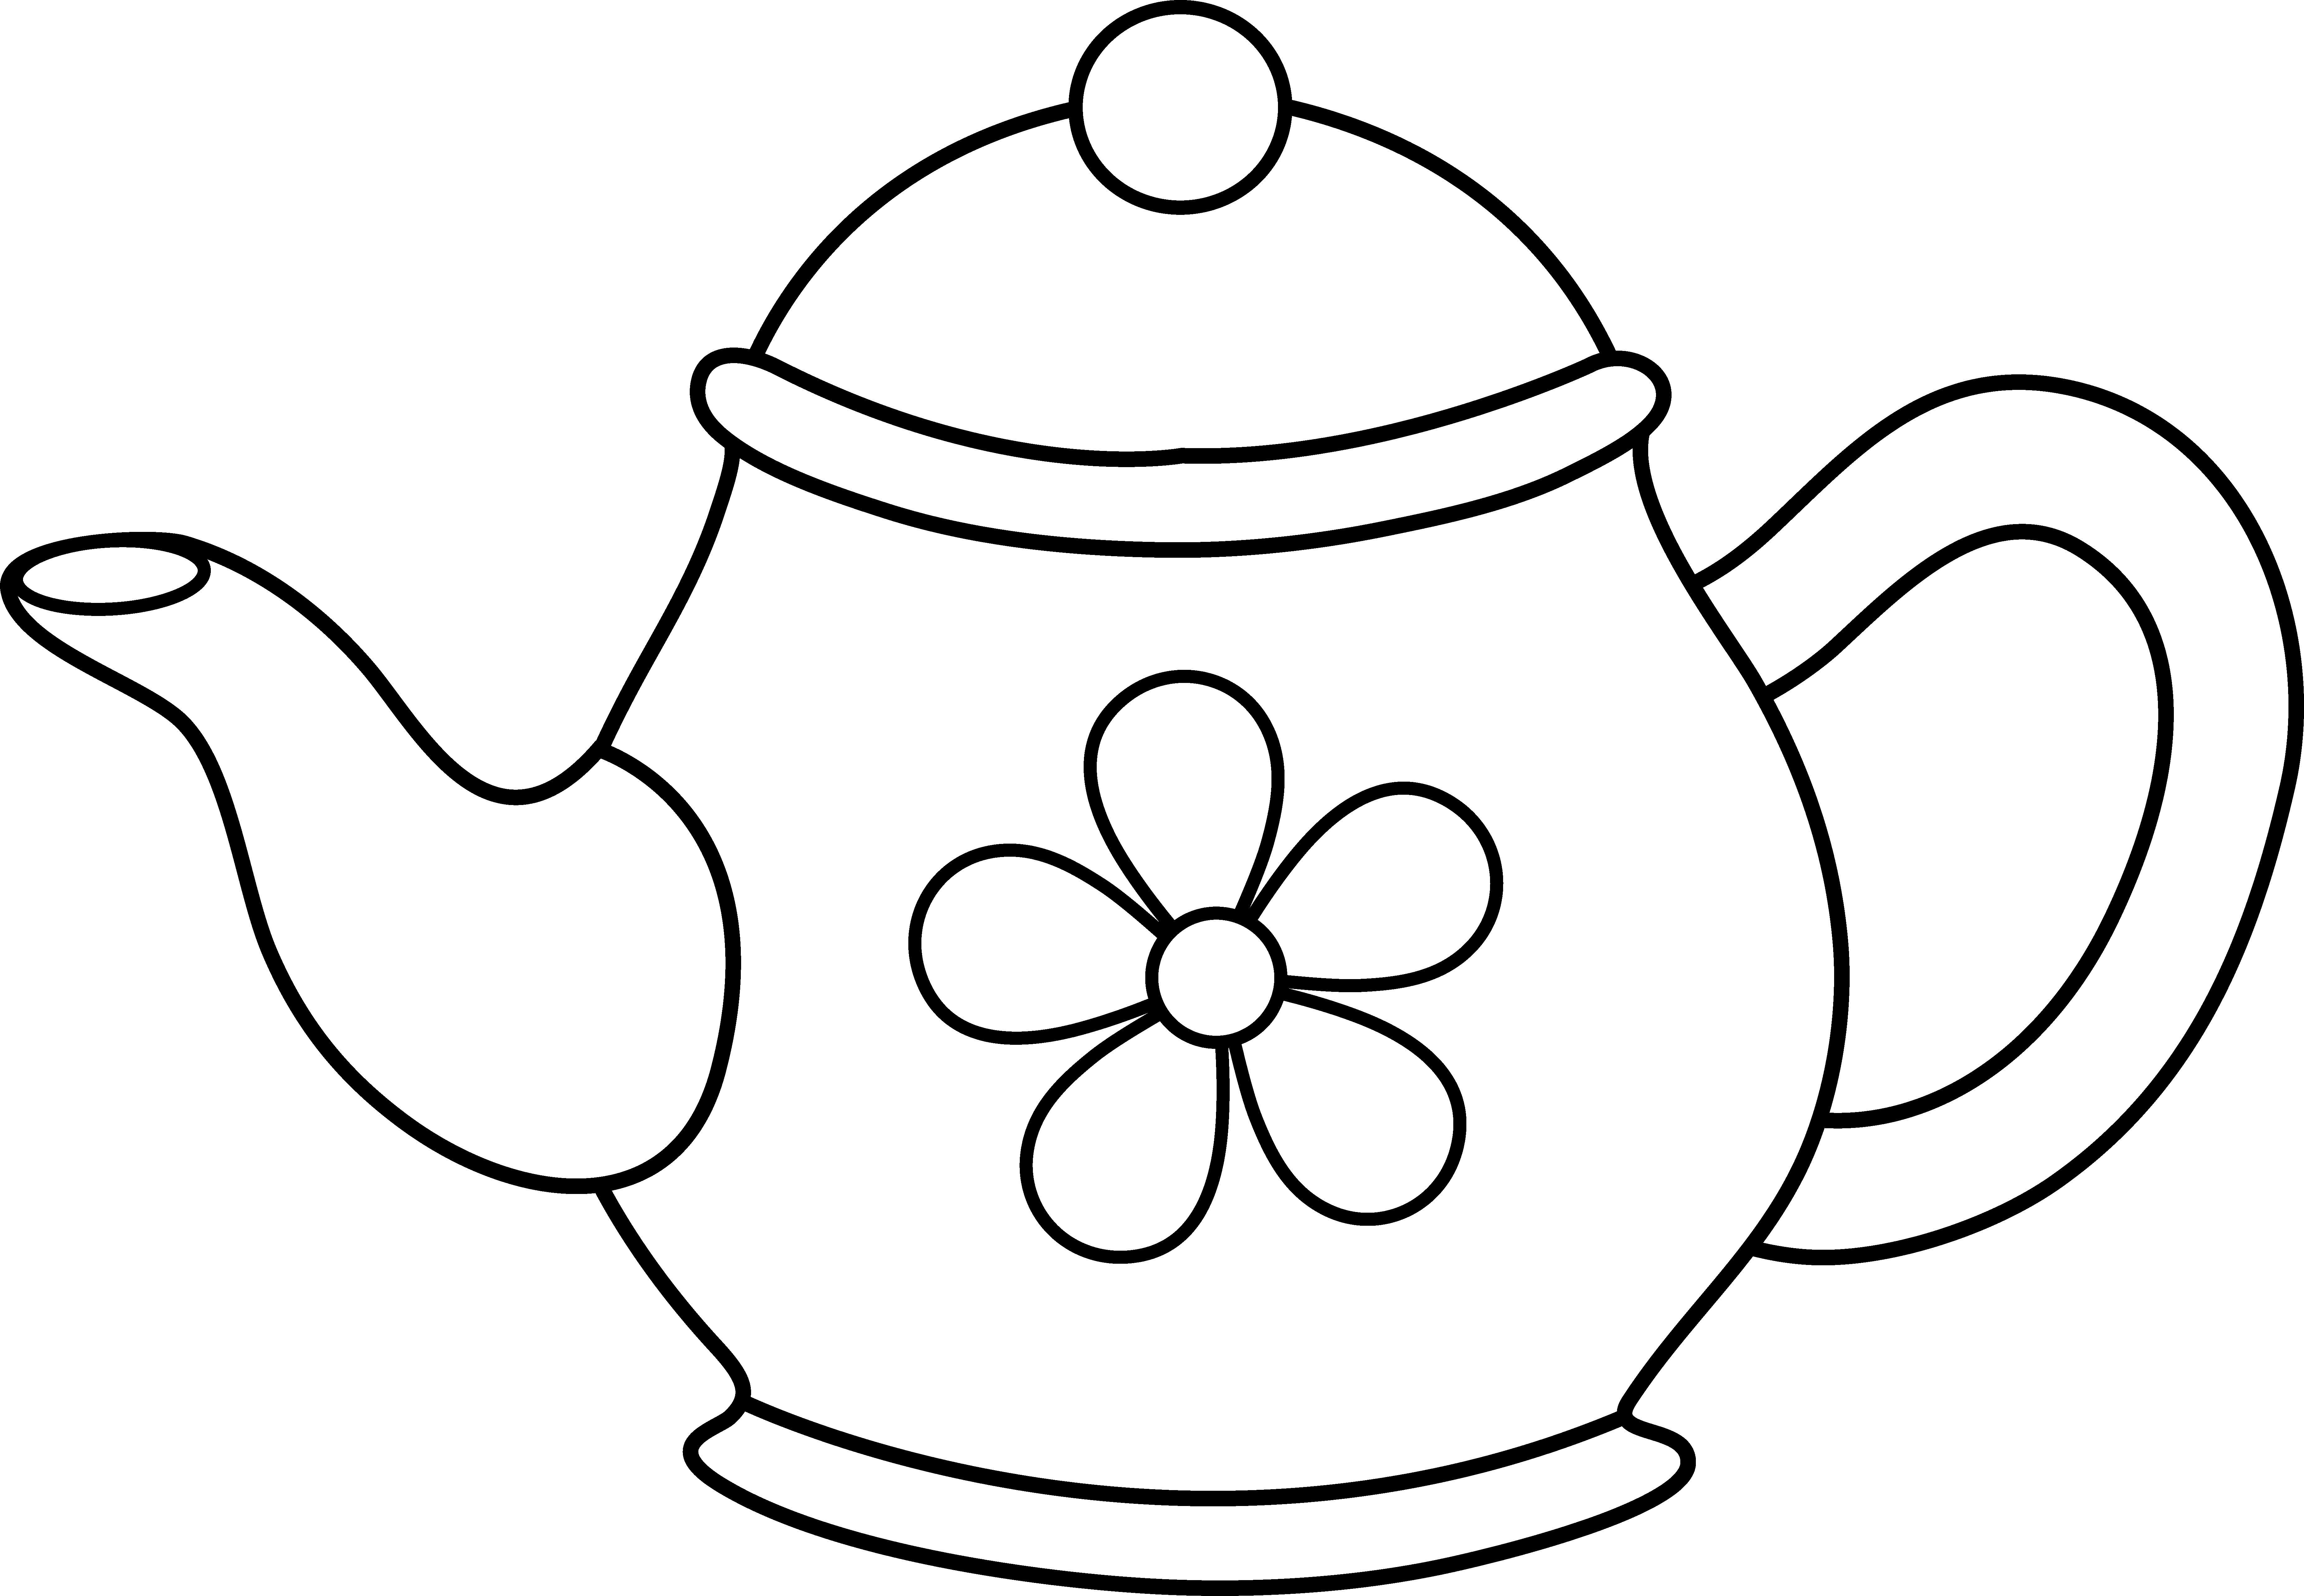 free-teapot-outline-download-free-teapot-outline-png-images-free